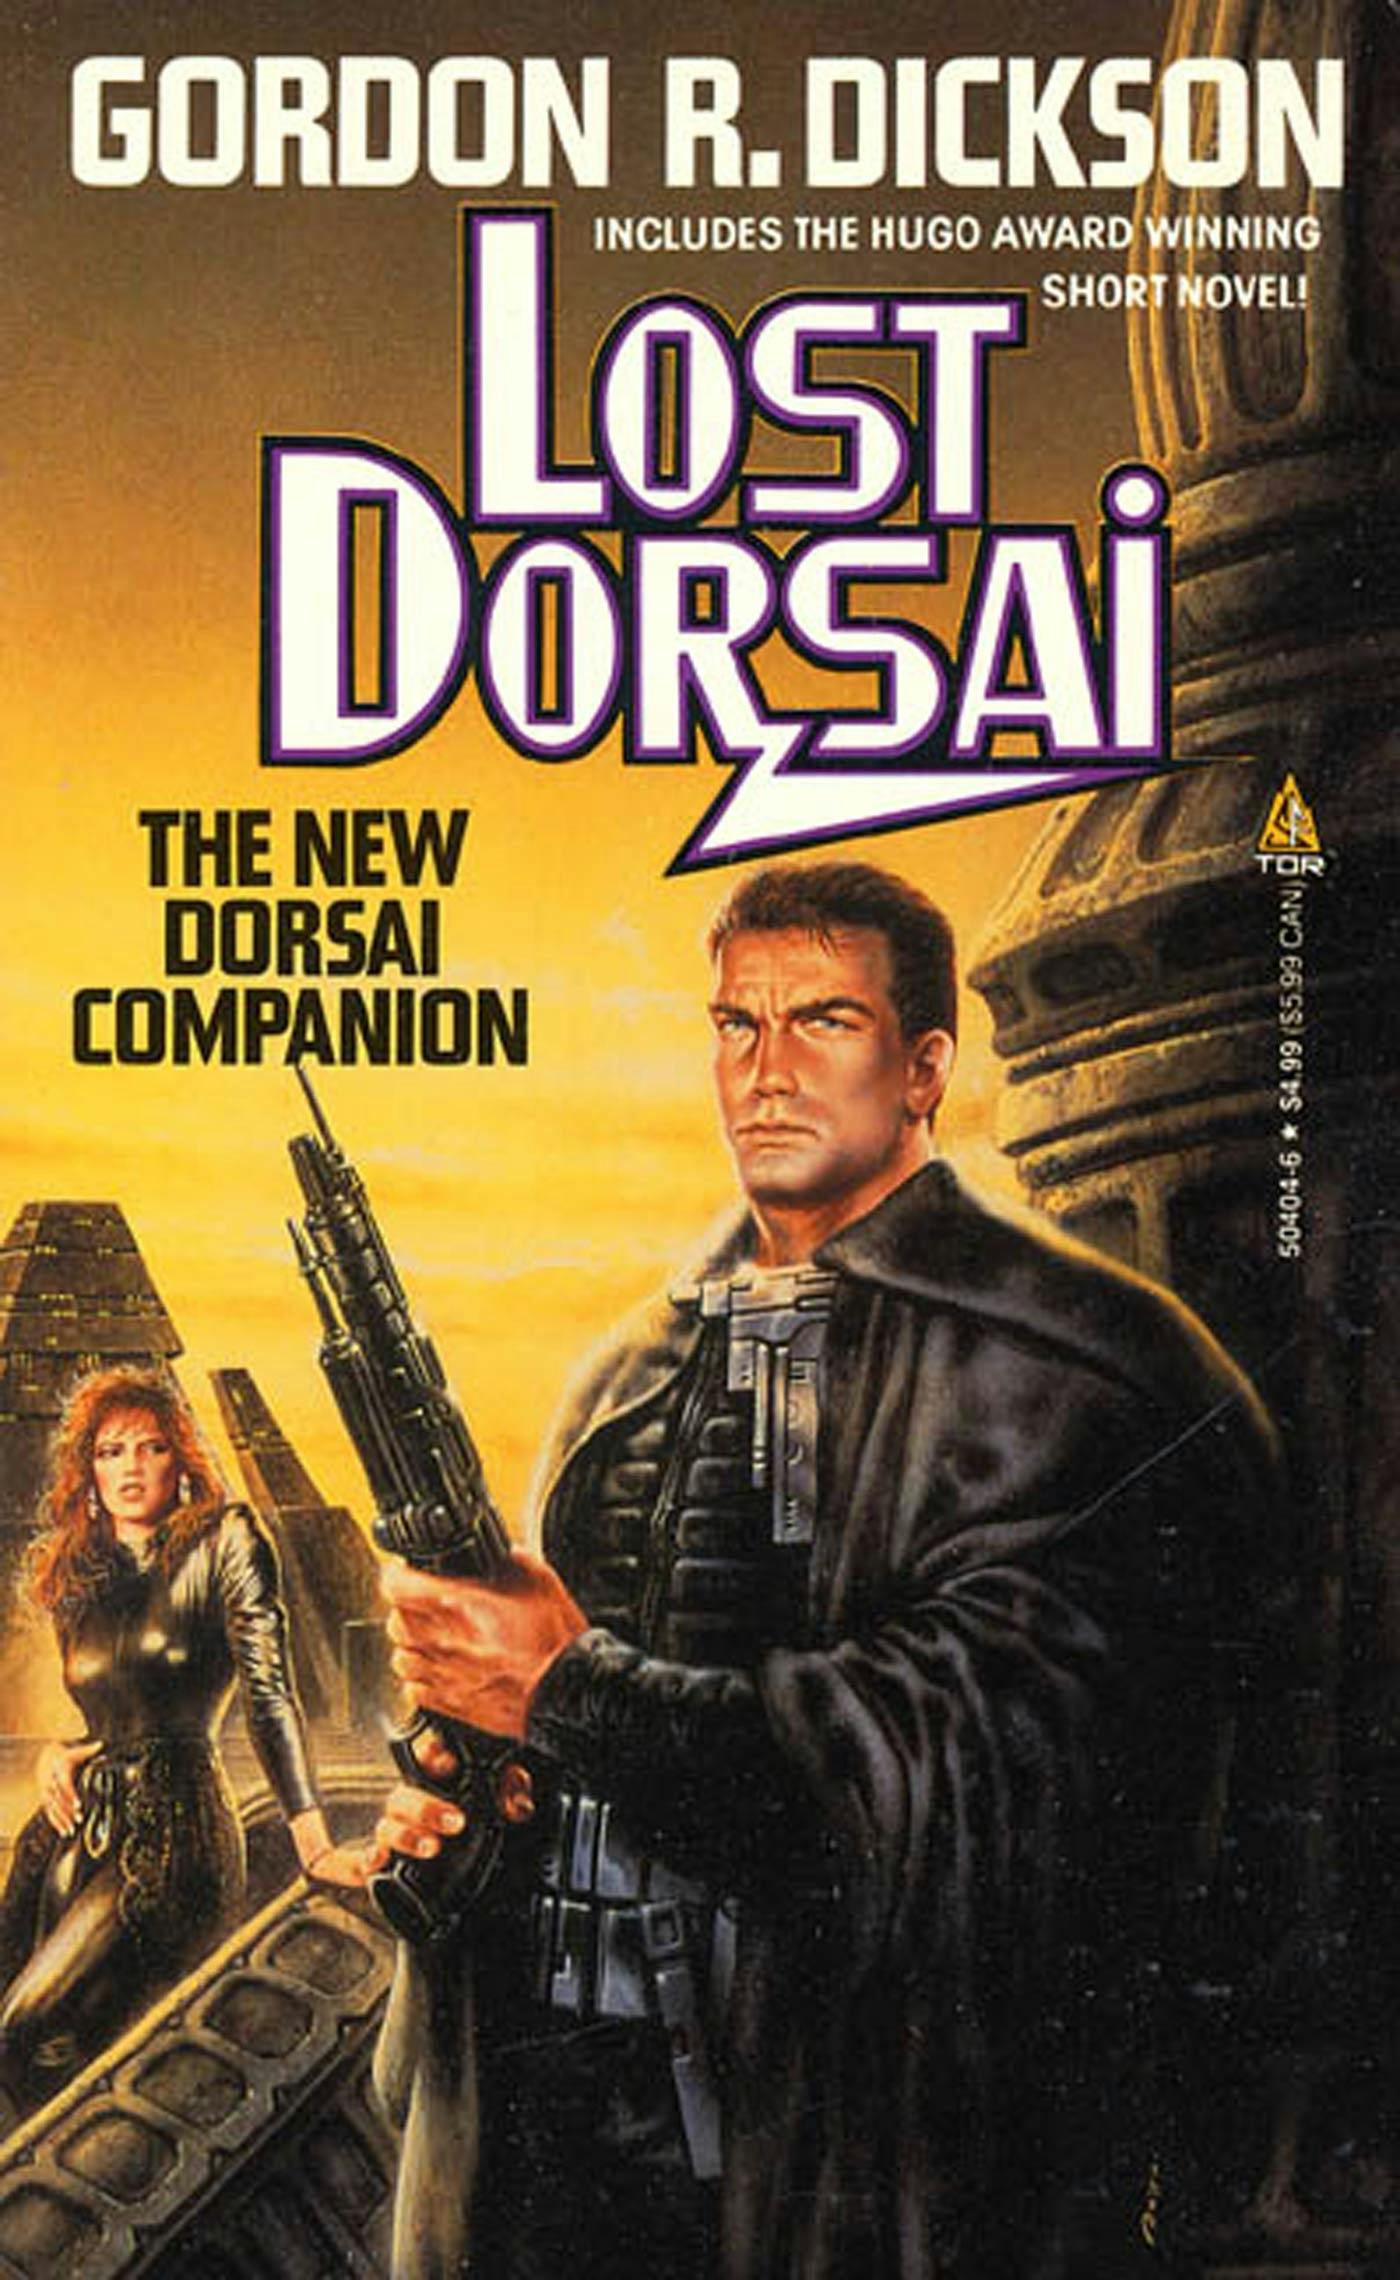 Cover for the book titled as: Lost Dorsai